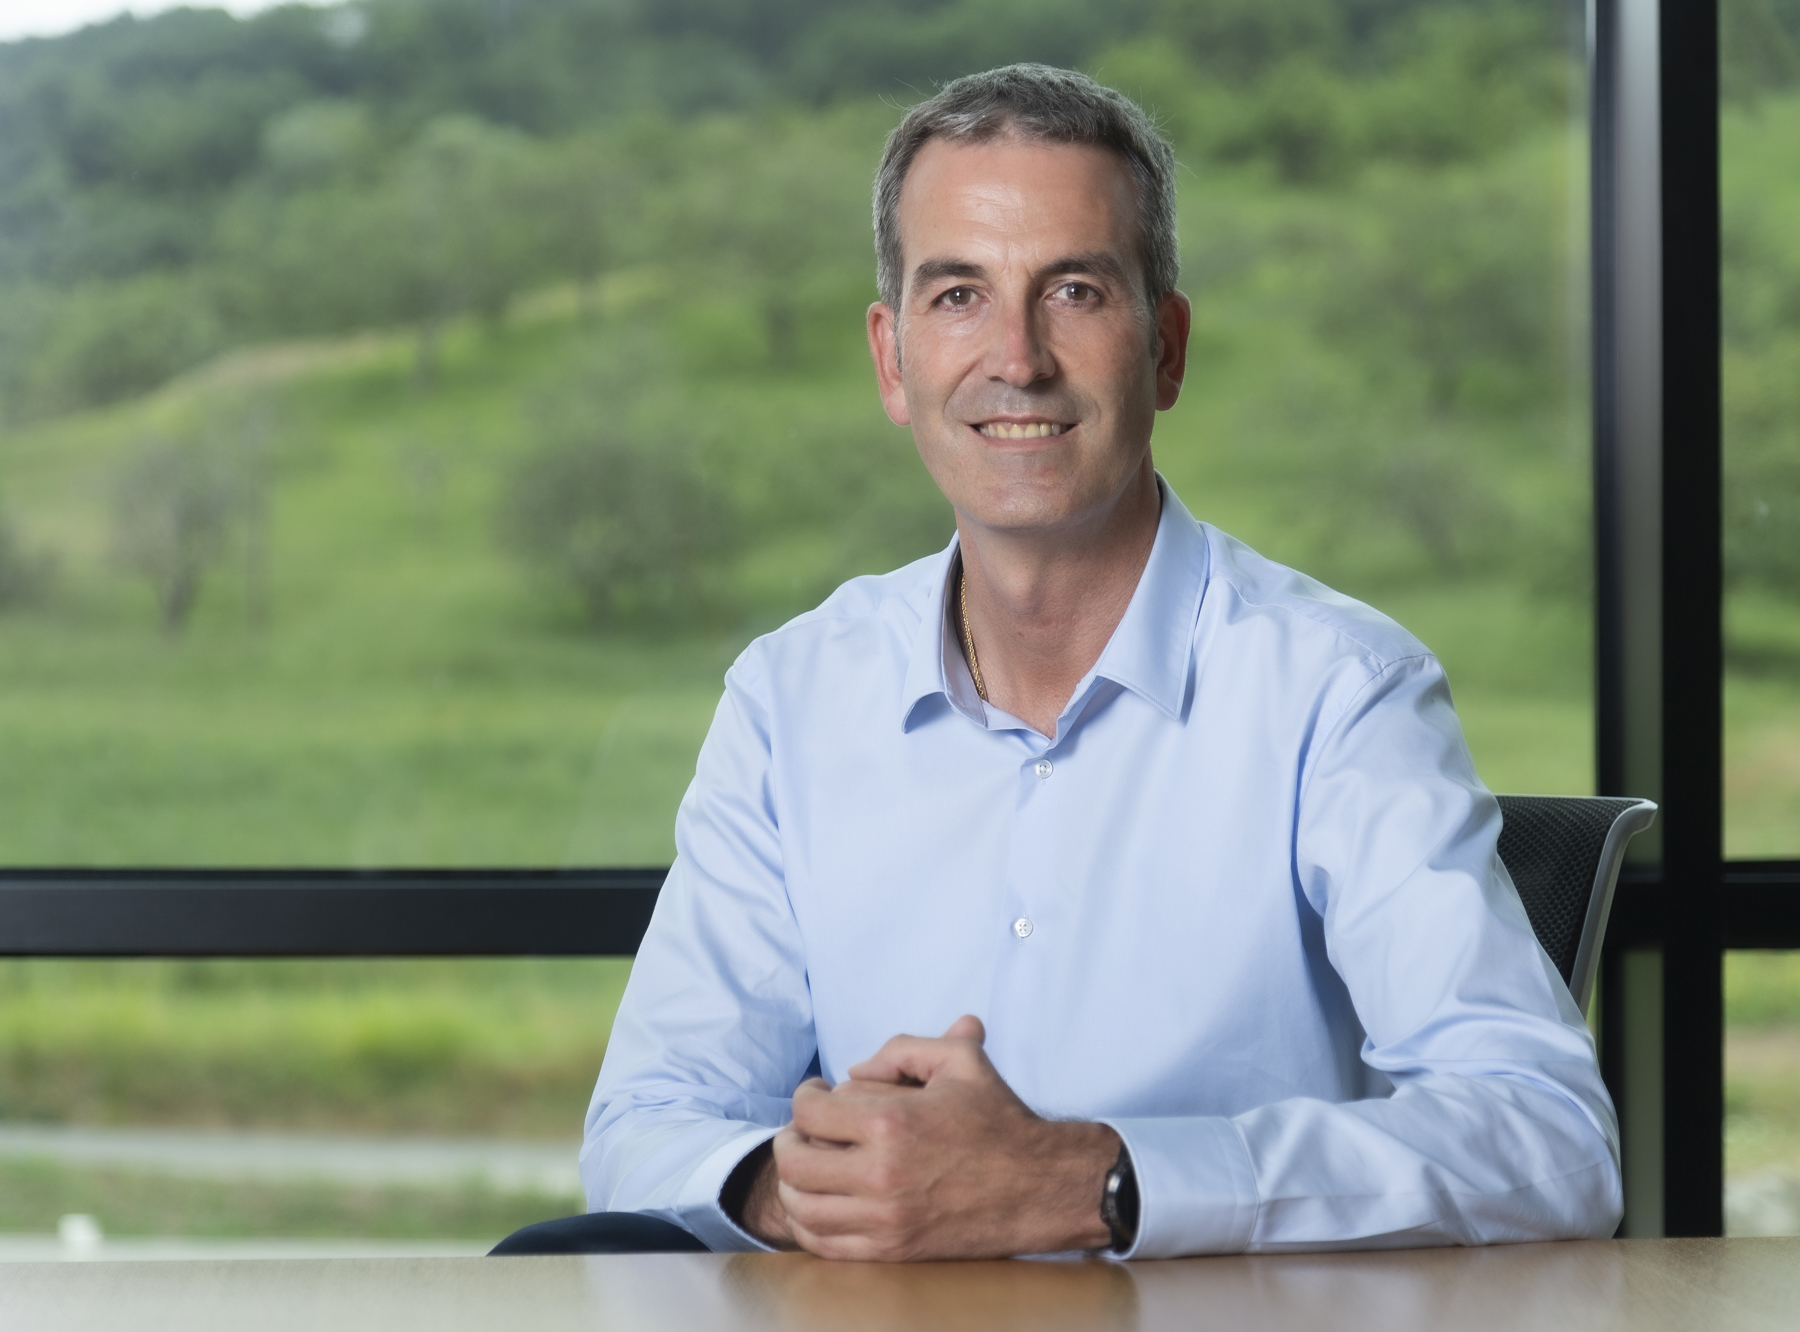 Imanol Rego assumes the position of General Manager for Irizar e-mobility